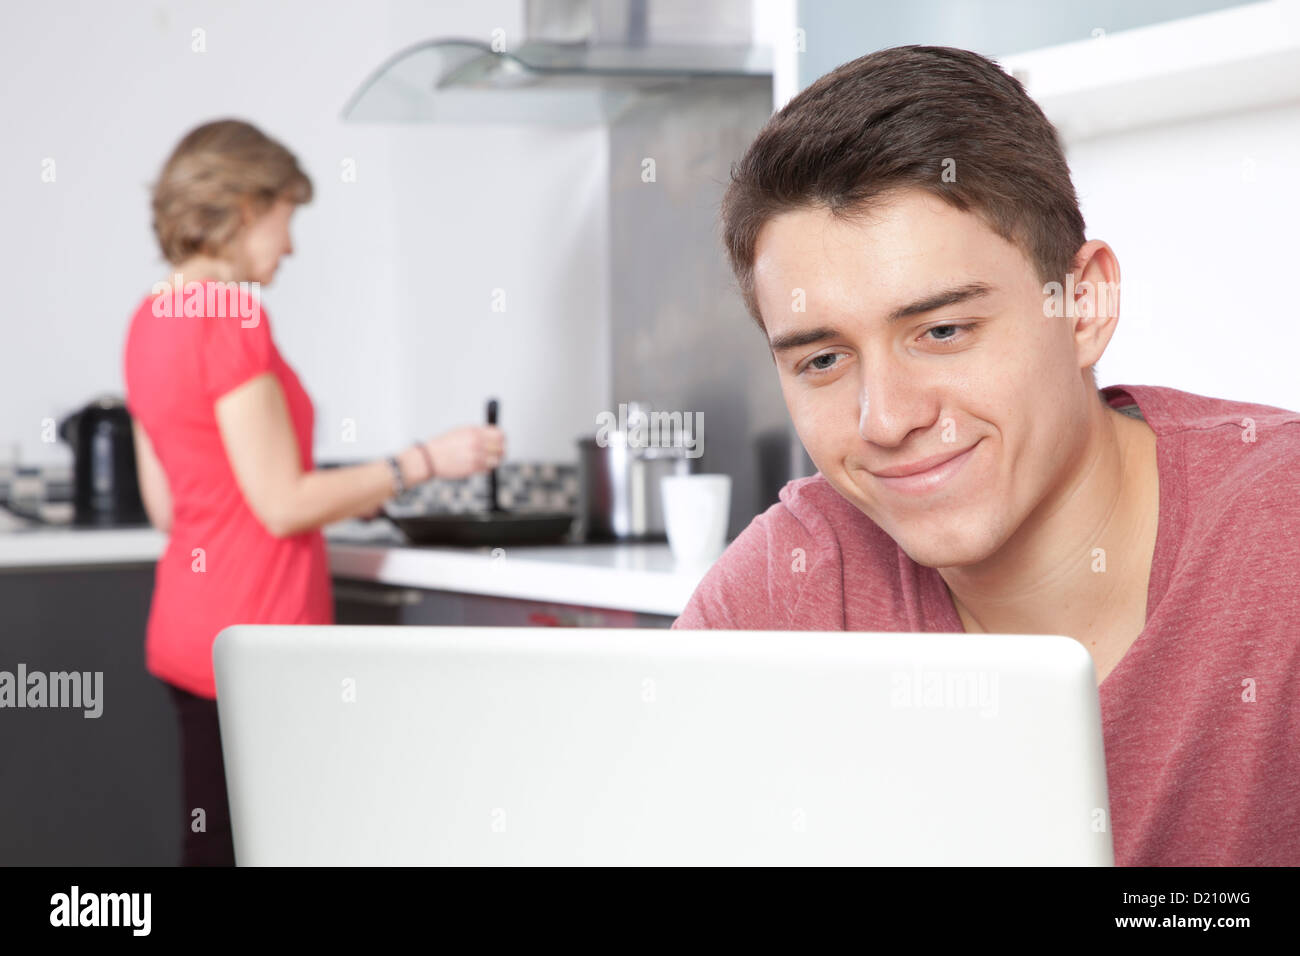 Smiling young male using a laptop, a woman is in the background cooking. Stock Photo